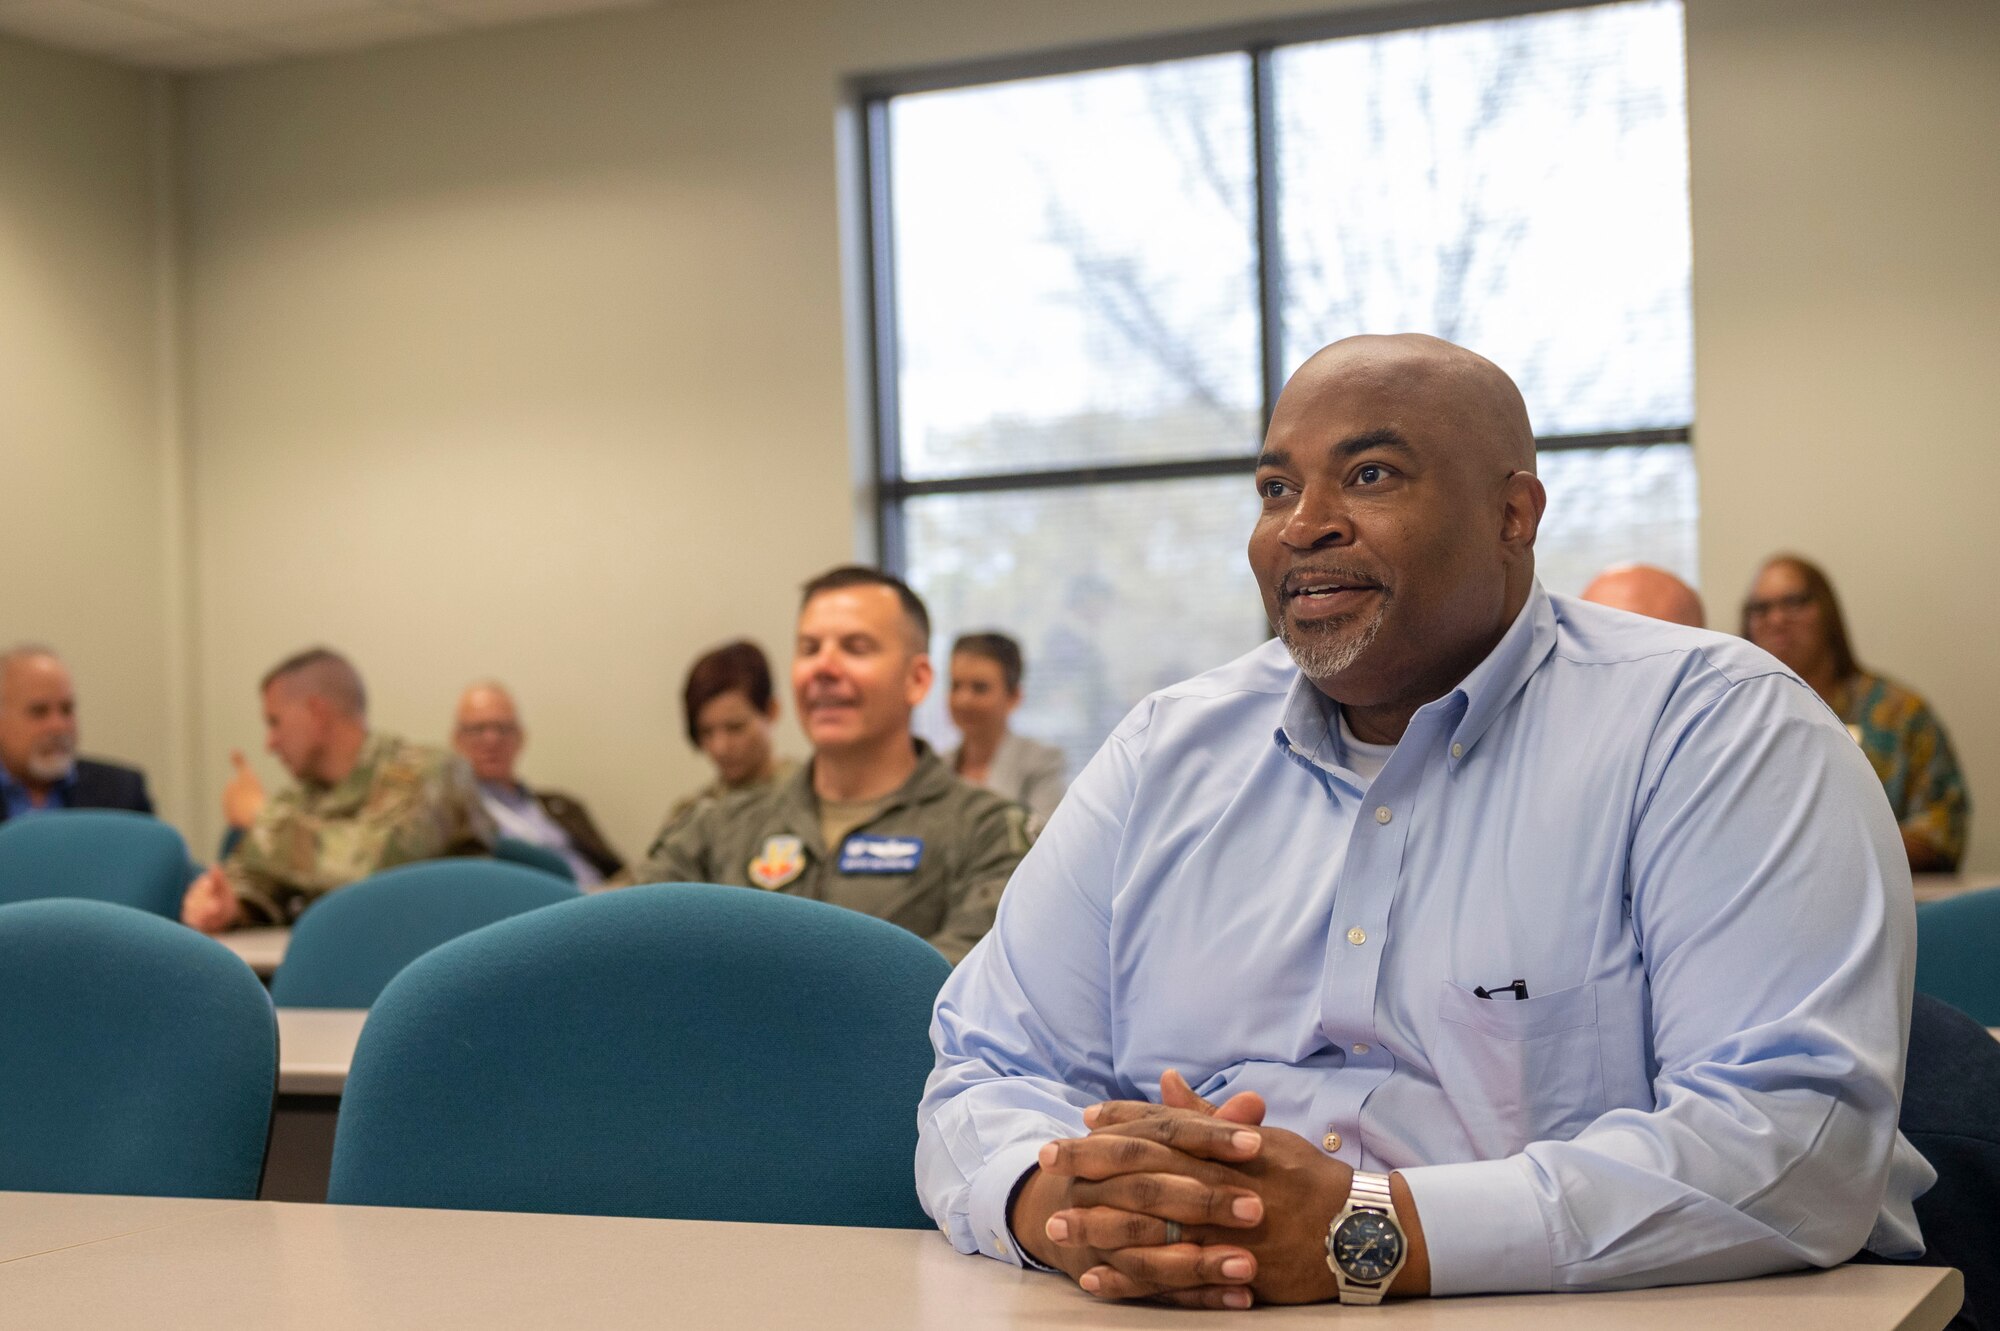 Mark Robinson, North Carolina Lt. Gov., tours the Watkins Das Education Center at Seymour Johnson Air Force Base, North Carolina, March 23, 2022. Robinson was the first African-American to be elected as the Lt. Governor of North Carolina. (U.S. Air Force photo by Senior Airman Kevin Holloway)